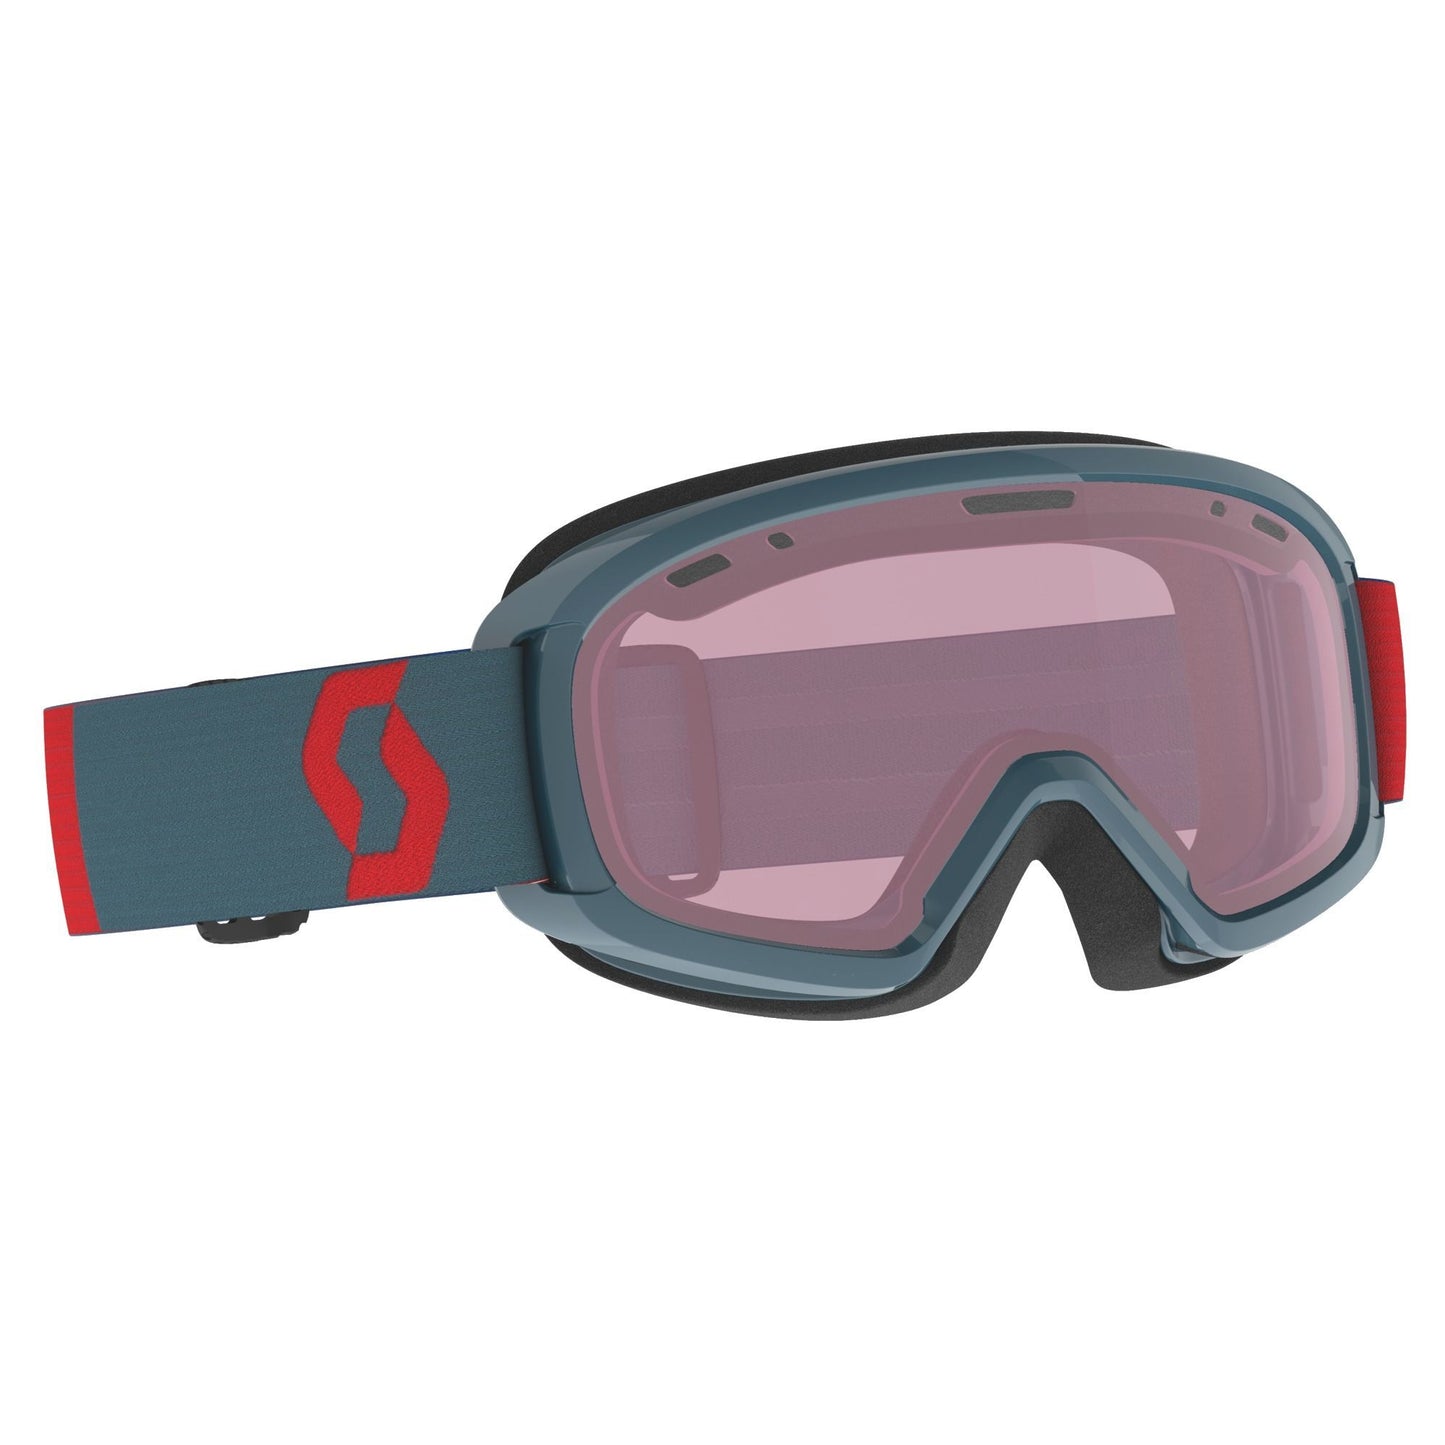 Scott Youth Jr Witty Snow Goggle Neon Red/Aruba Green / Enhancer Snow Goggles